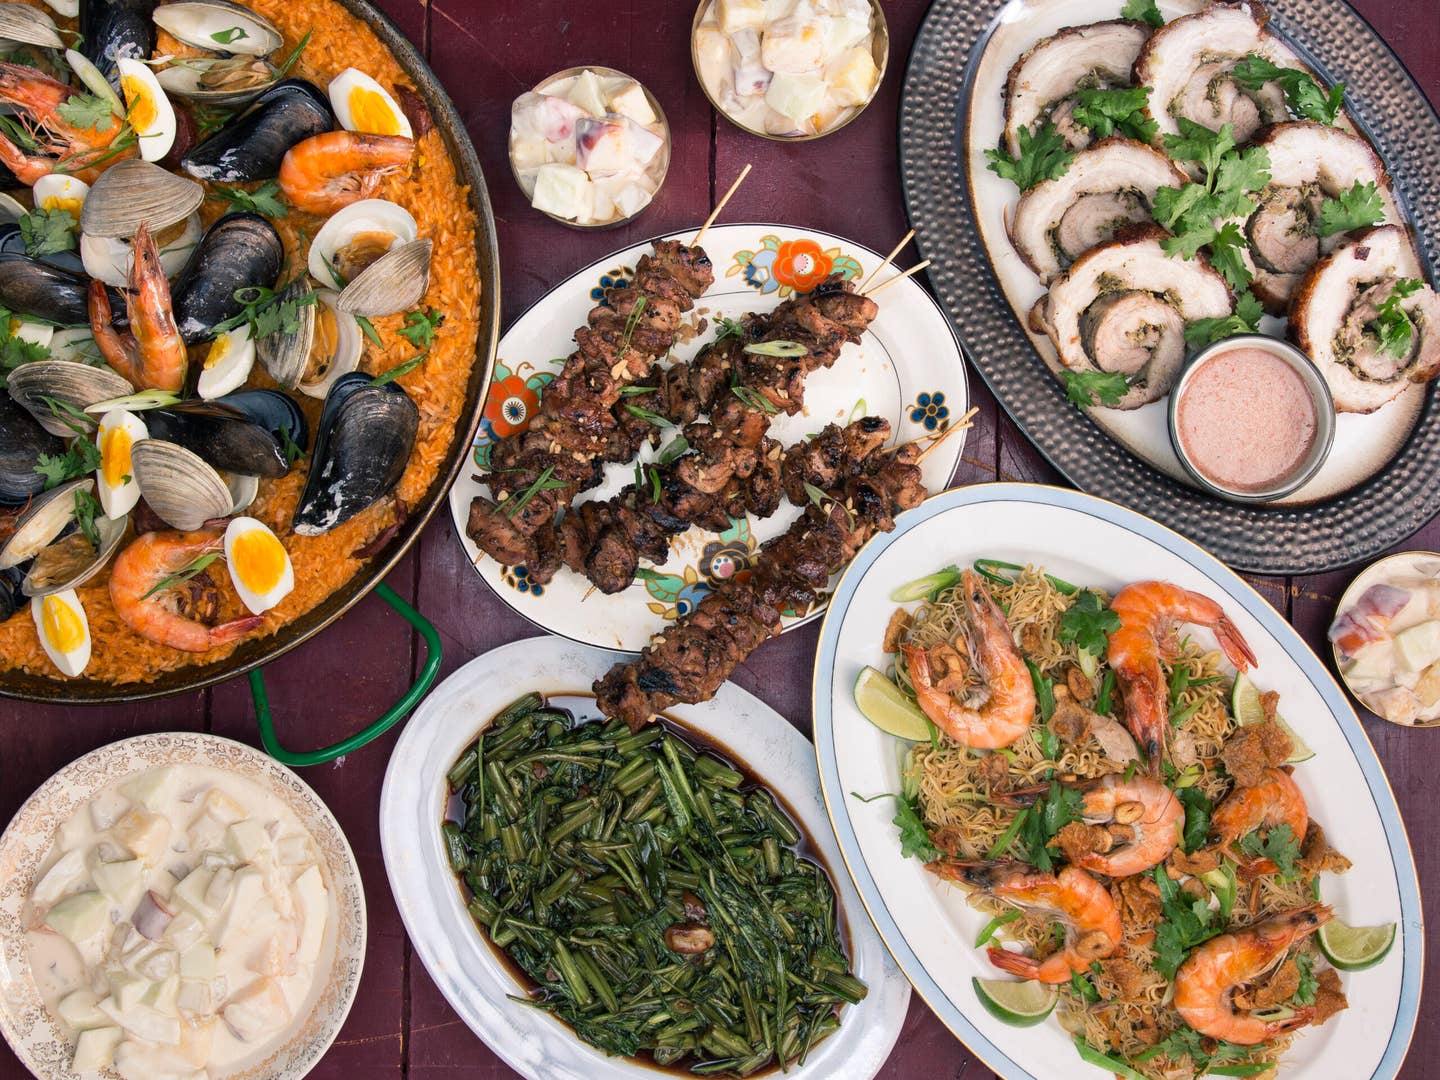 A Filipino Feast Fit for Your Whole Family